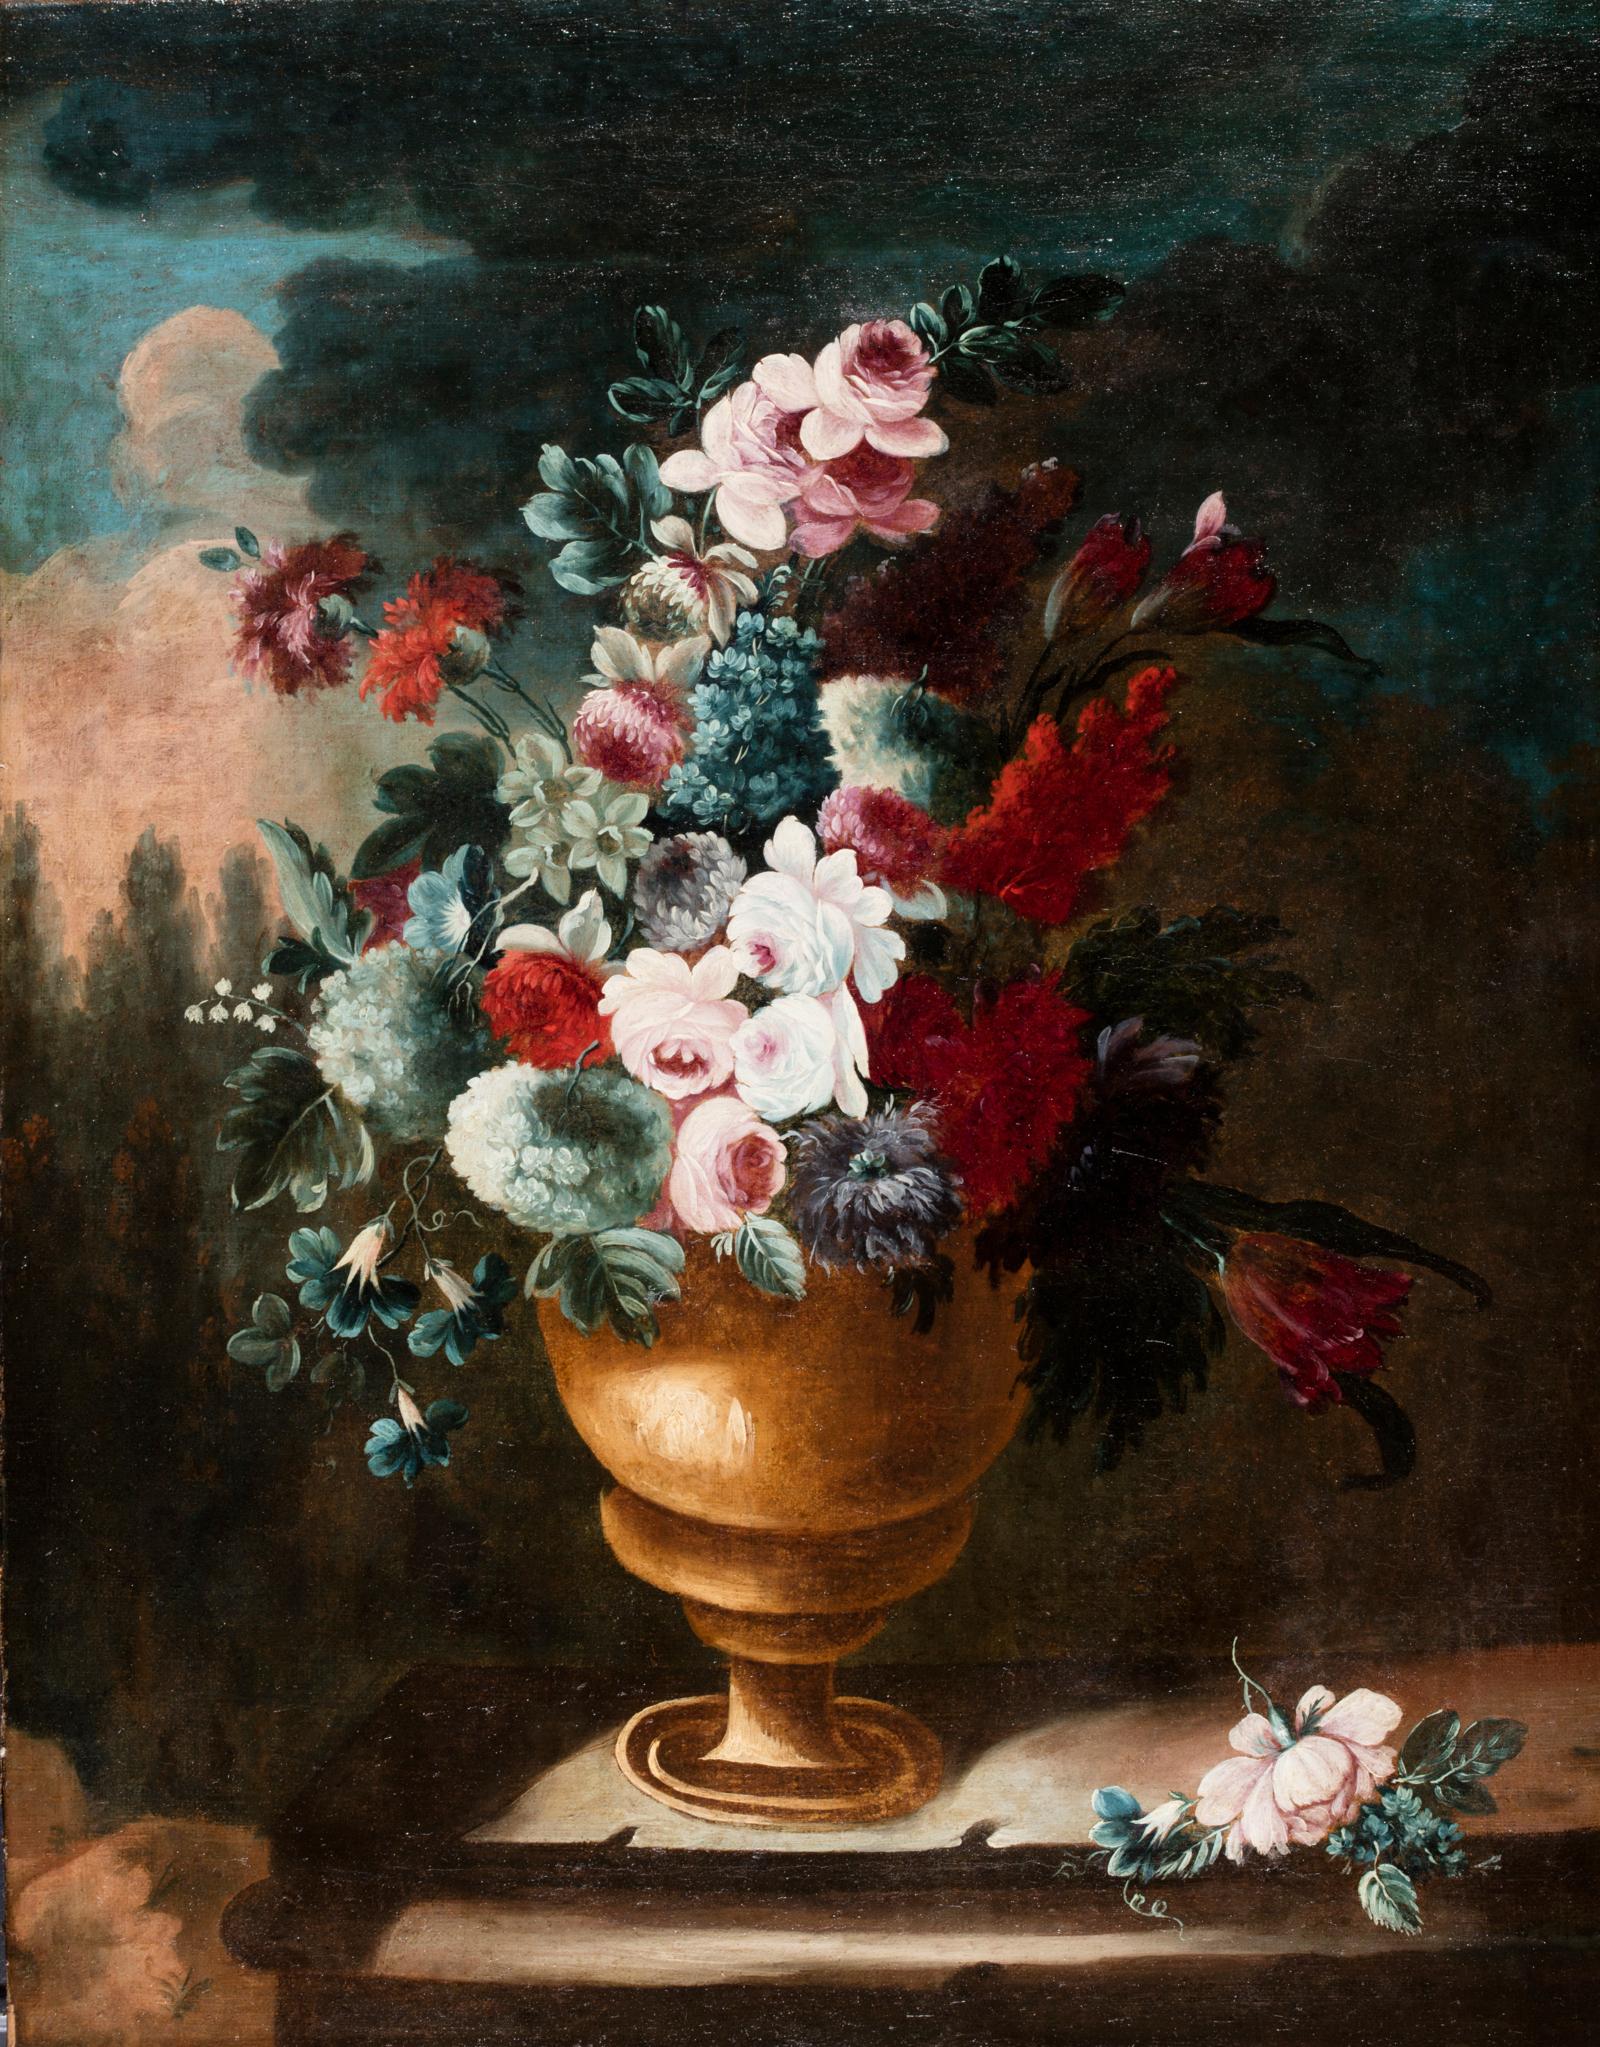 Giuseppe Lavagna, Italian oil on canvas still life with vase and flower

The painting, of beautiful workmanship and in good condition, represents a sumptuous composition of flowers that adorns a copper vase. The still life rests on a stone